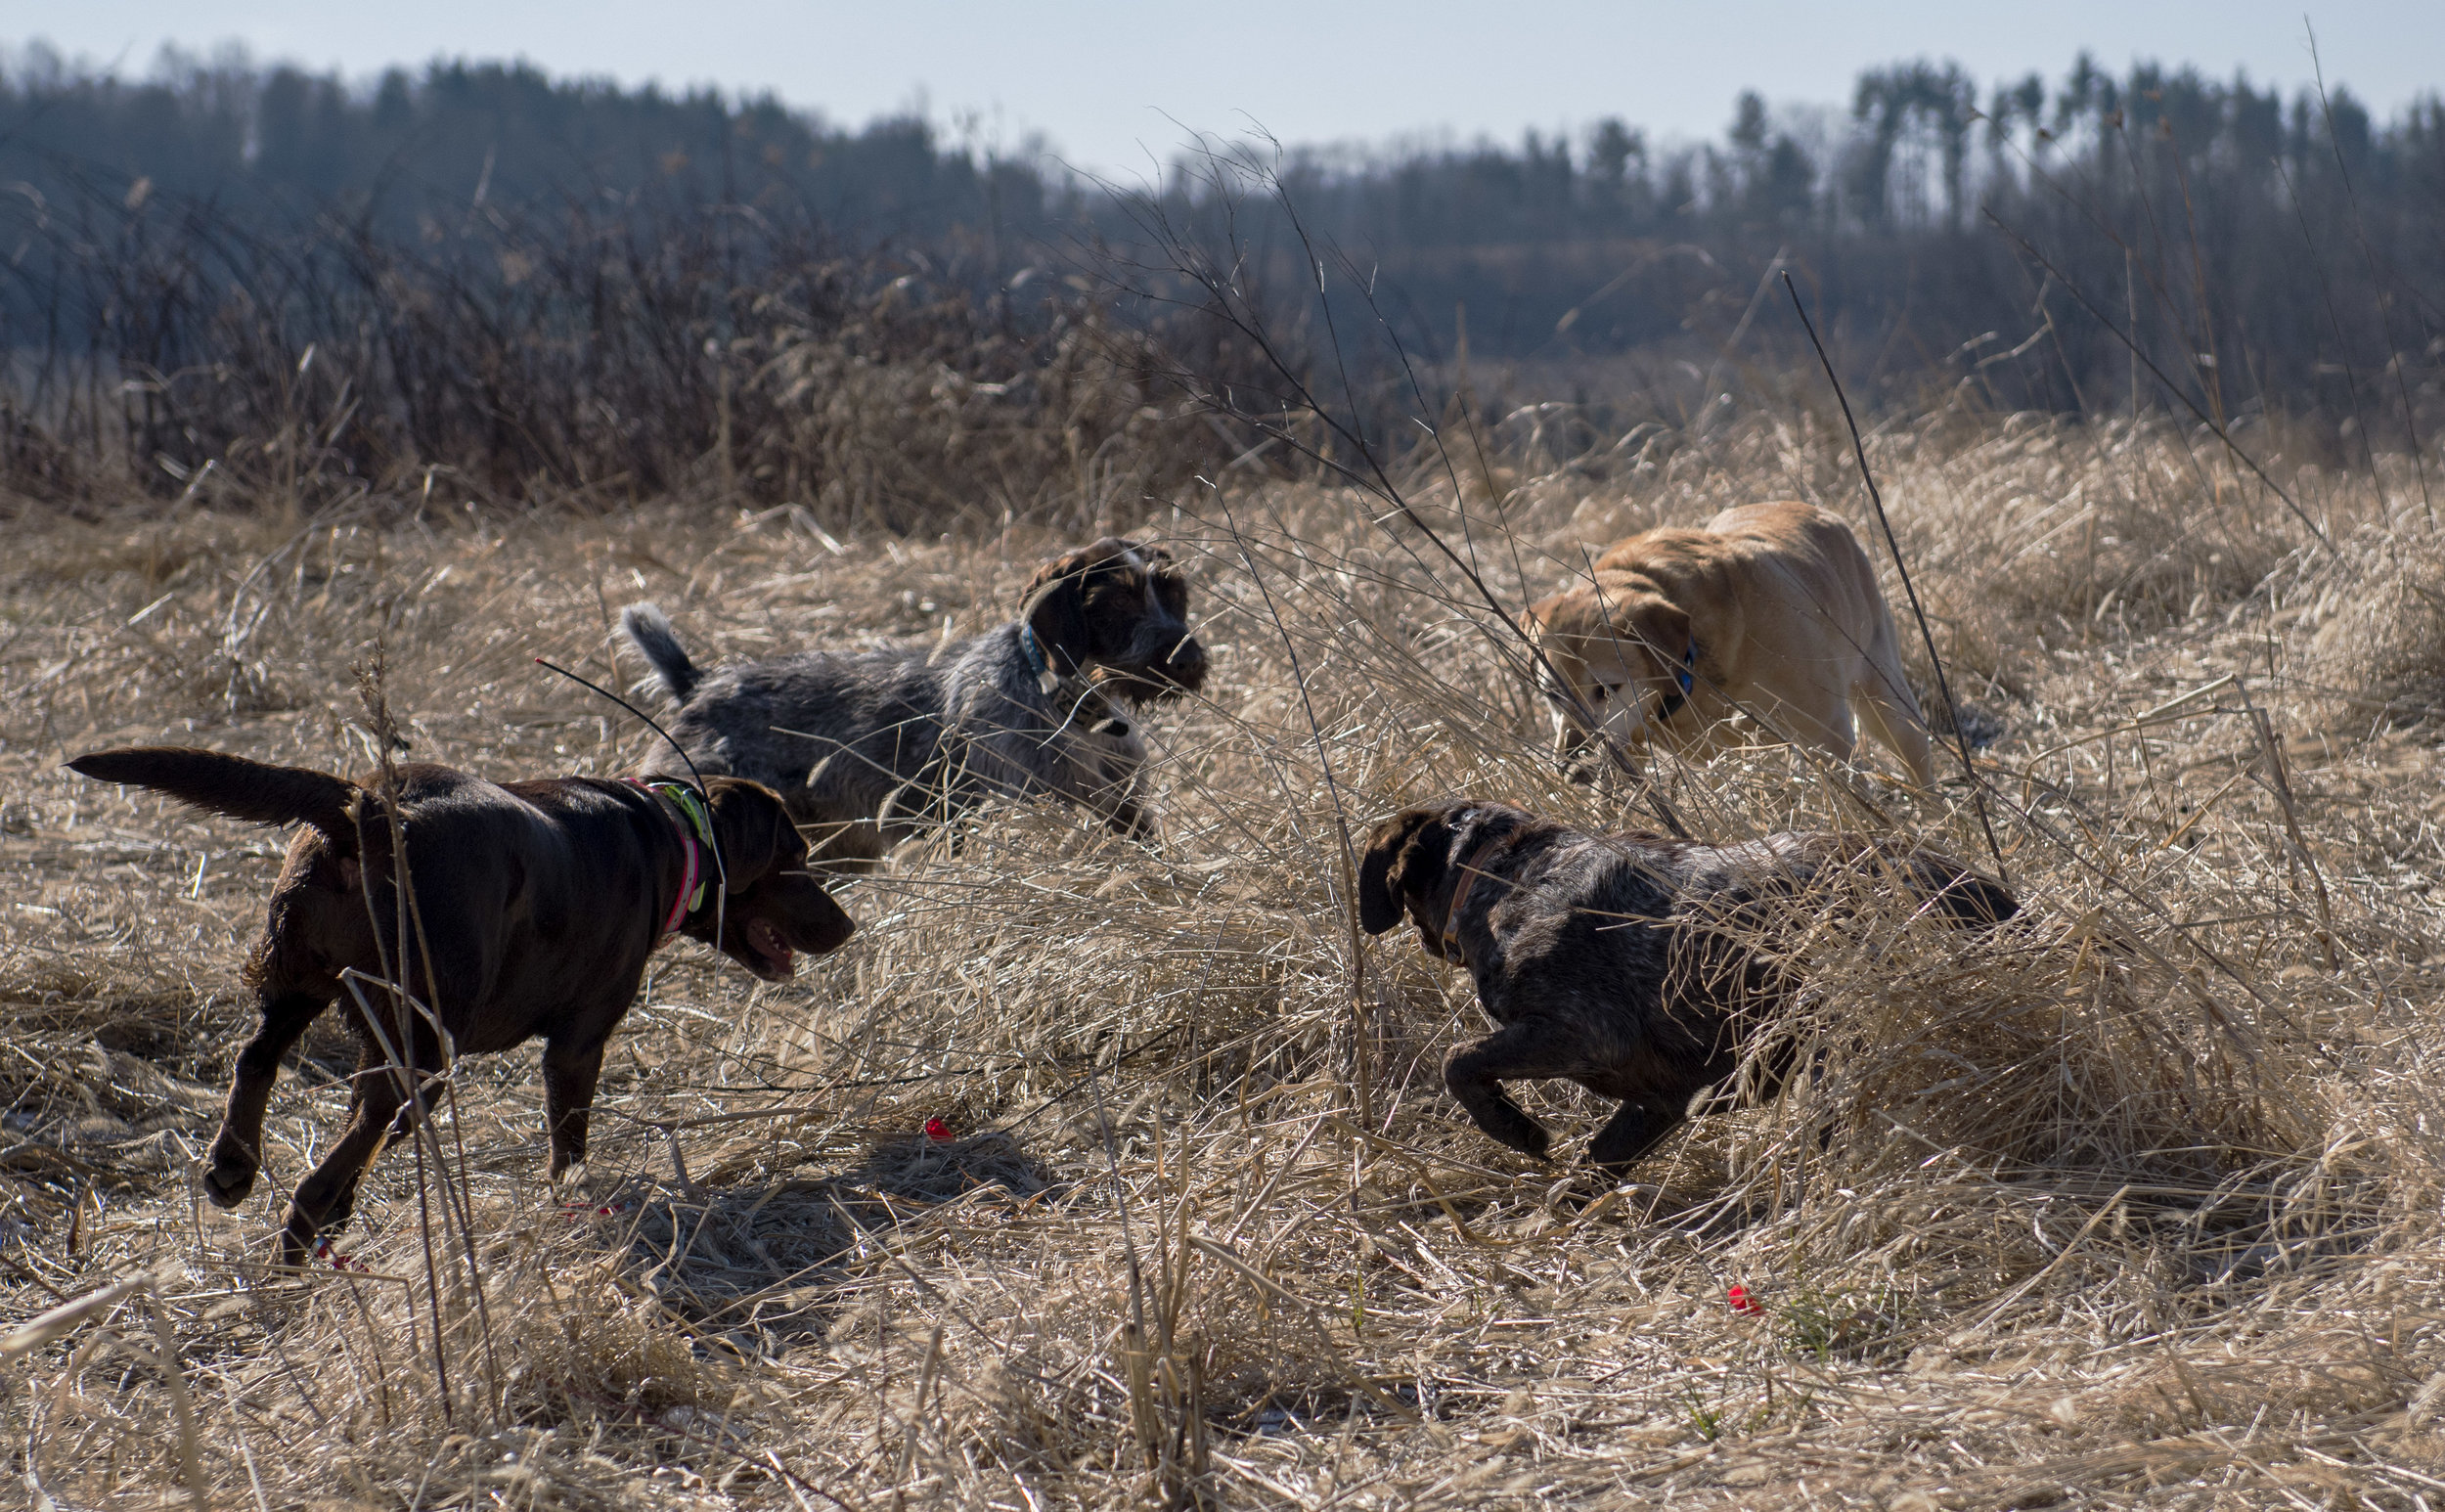  Multiple dogs encircle the hiding place of a doomed bird as the hunters close in. Once the guides give the call the dogs will flush the bird from its hiding place and hopefully, it will fly straight upwards where the hunters can get a proper shot at